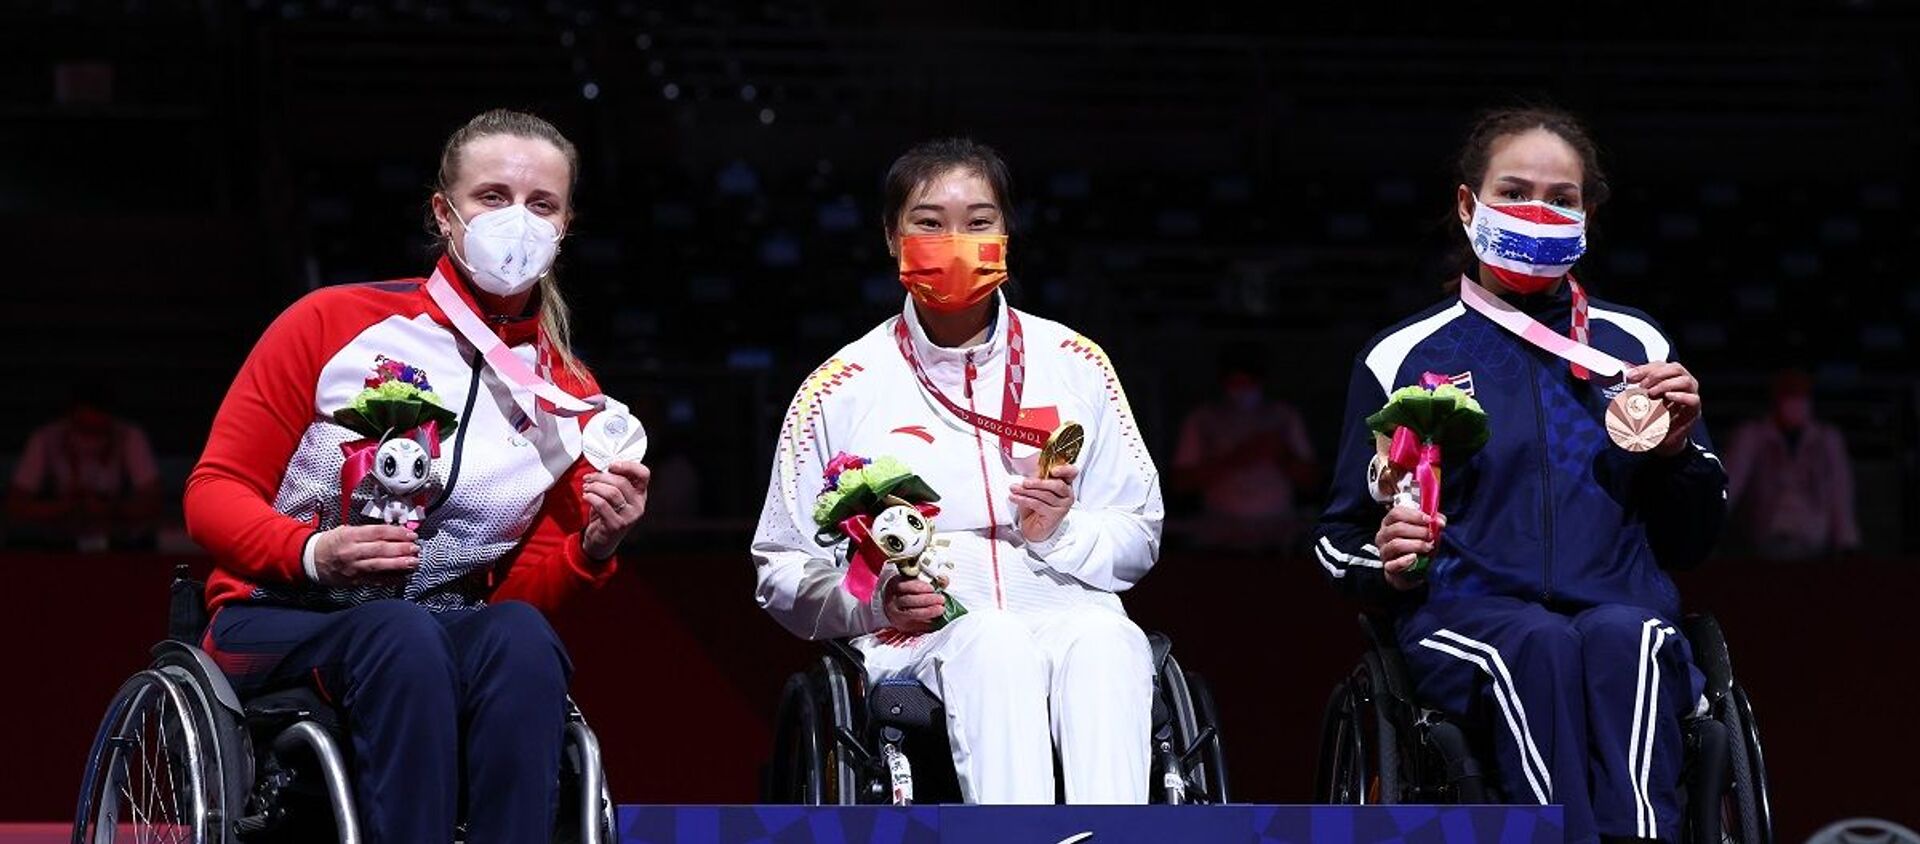 Tokyo 2020 Paralympic Games - Wheelchair Fencing - Women's Epee Individual - 俄羅斯衛星通訊社, 1920, 26.08.2021